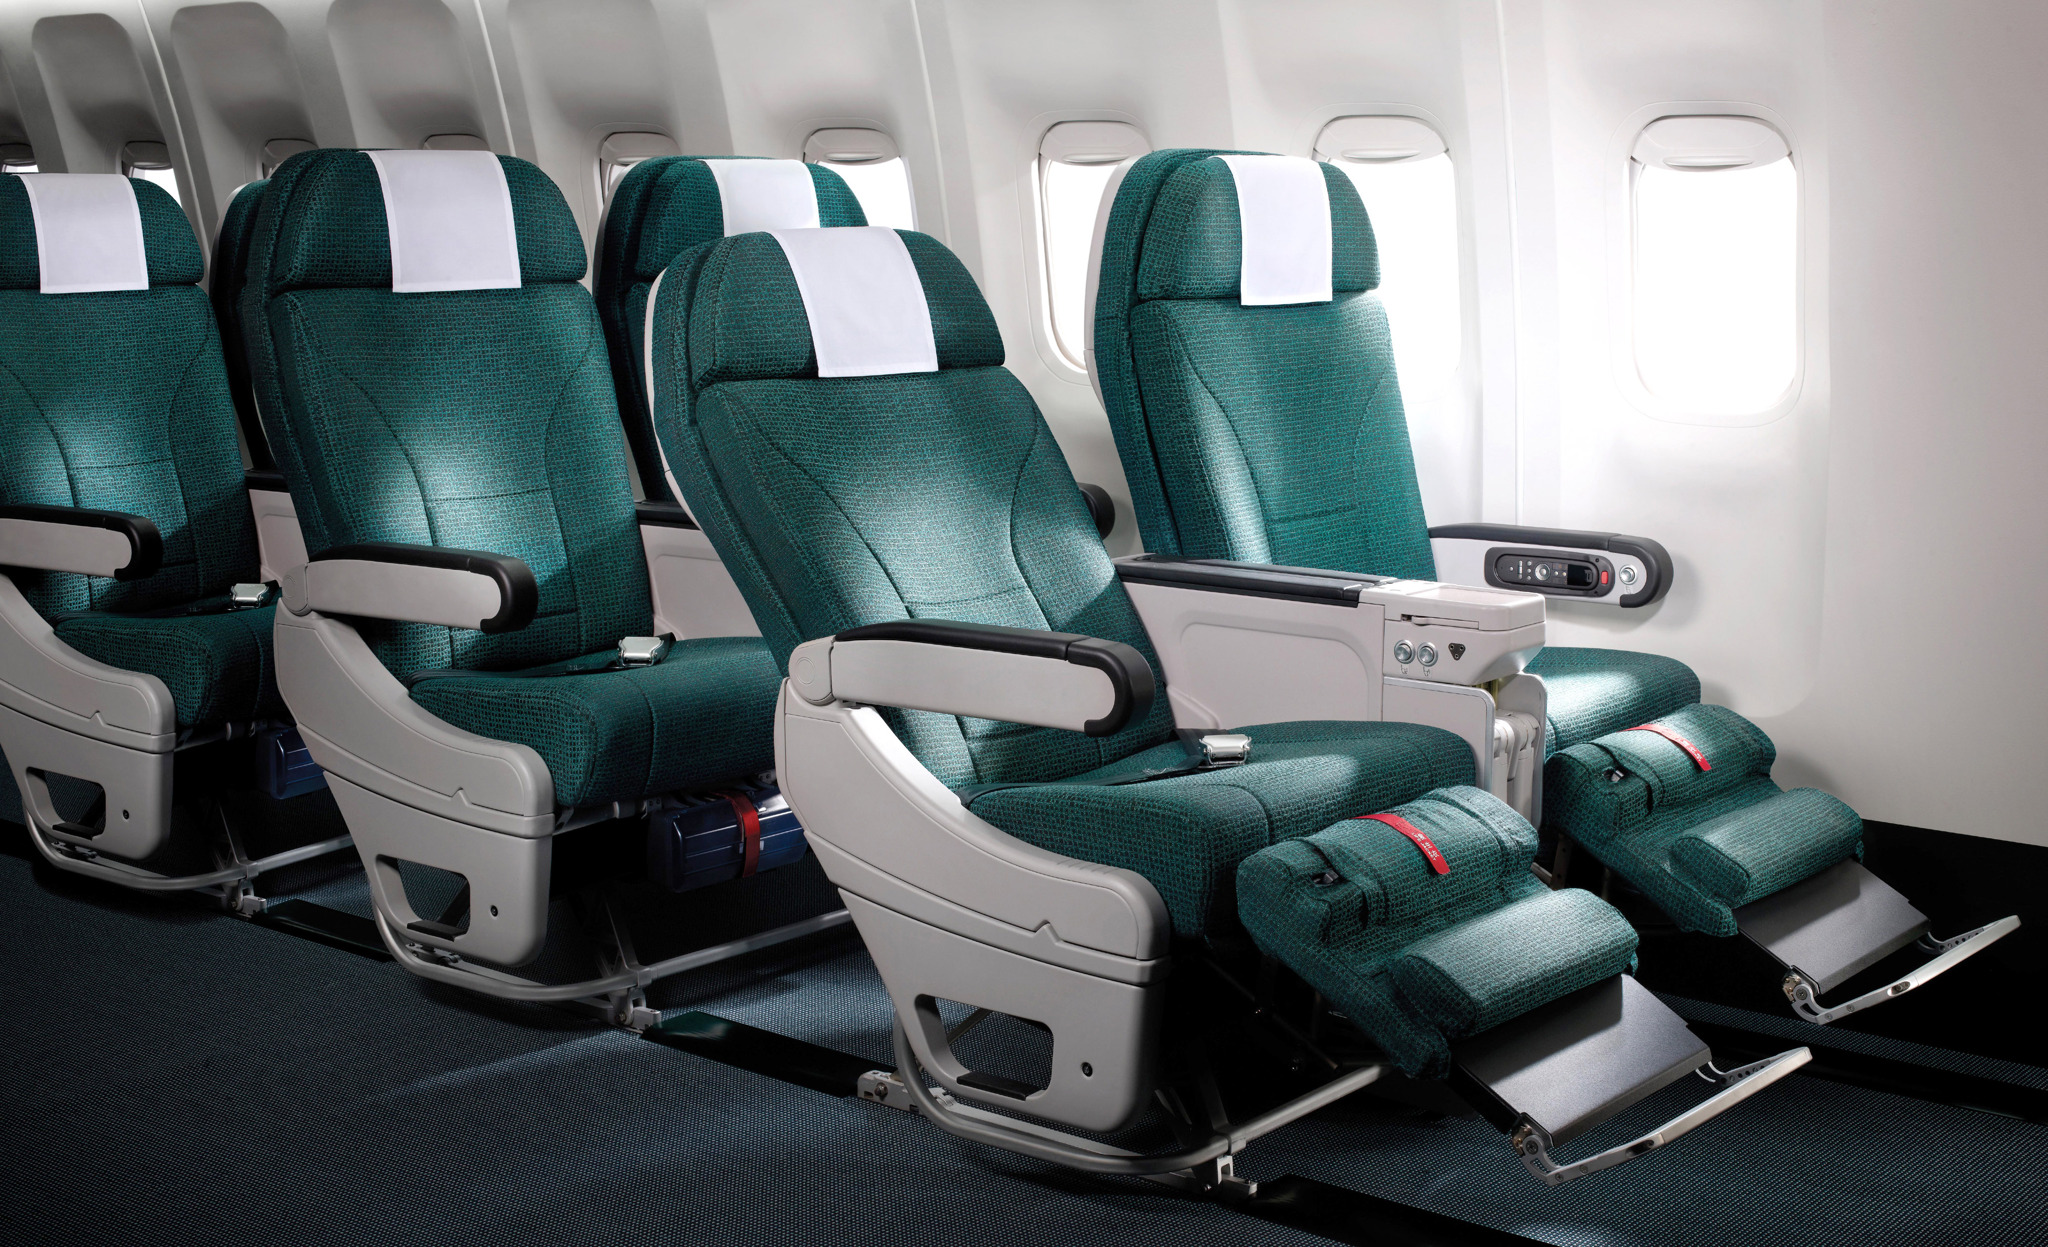 Cathay Pacific Takes Delivery Of First Aircraft With New Premium Economy Product And Long Haul Class Seats